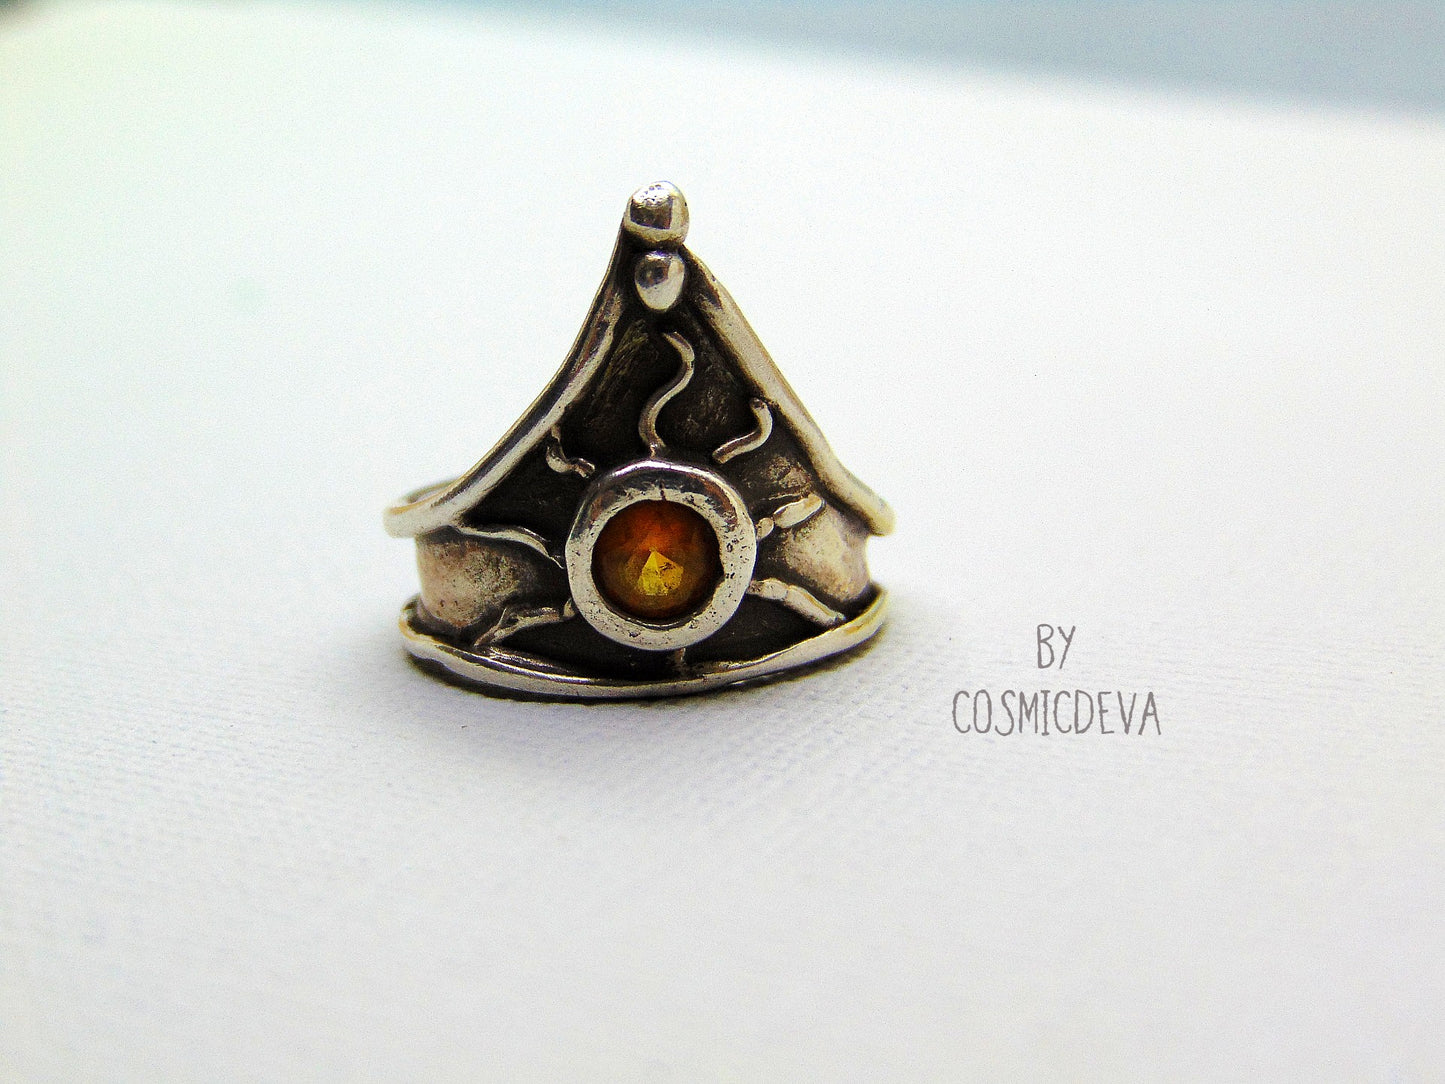 Be the knight in shining armor with this beautiful sterling silver ring! Handcrafted with a medieval triangle shield design, this classic piece is set with a 5mm round citrine stone and oxidized for a vintage antique look. The decorative hand sculptured triangle shield makes the perfect centerpiece, adding an antique charm to your everyday look.. - CosmicDeva